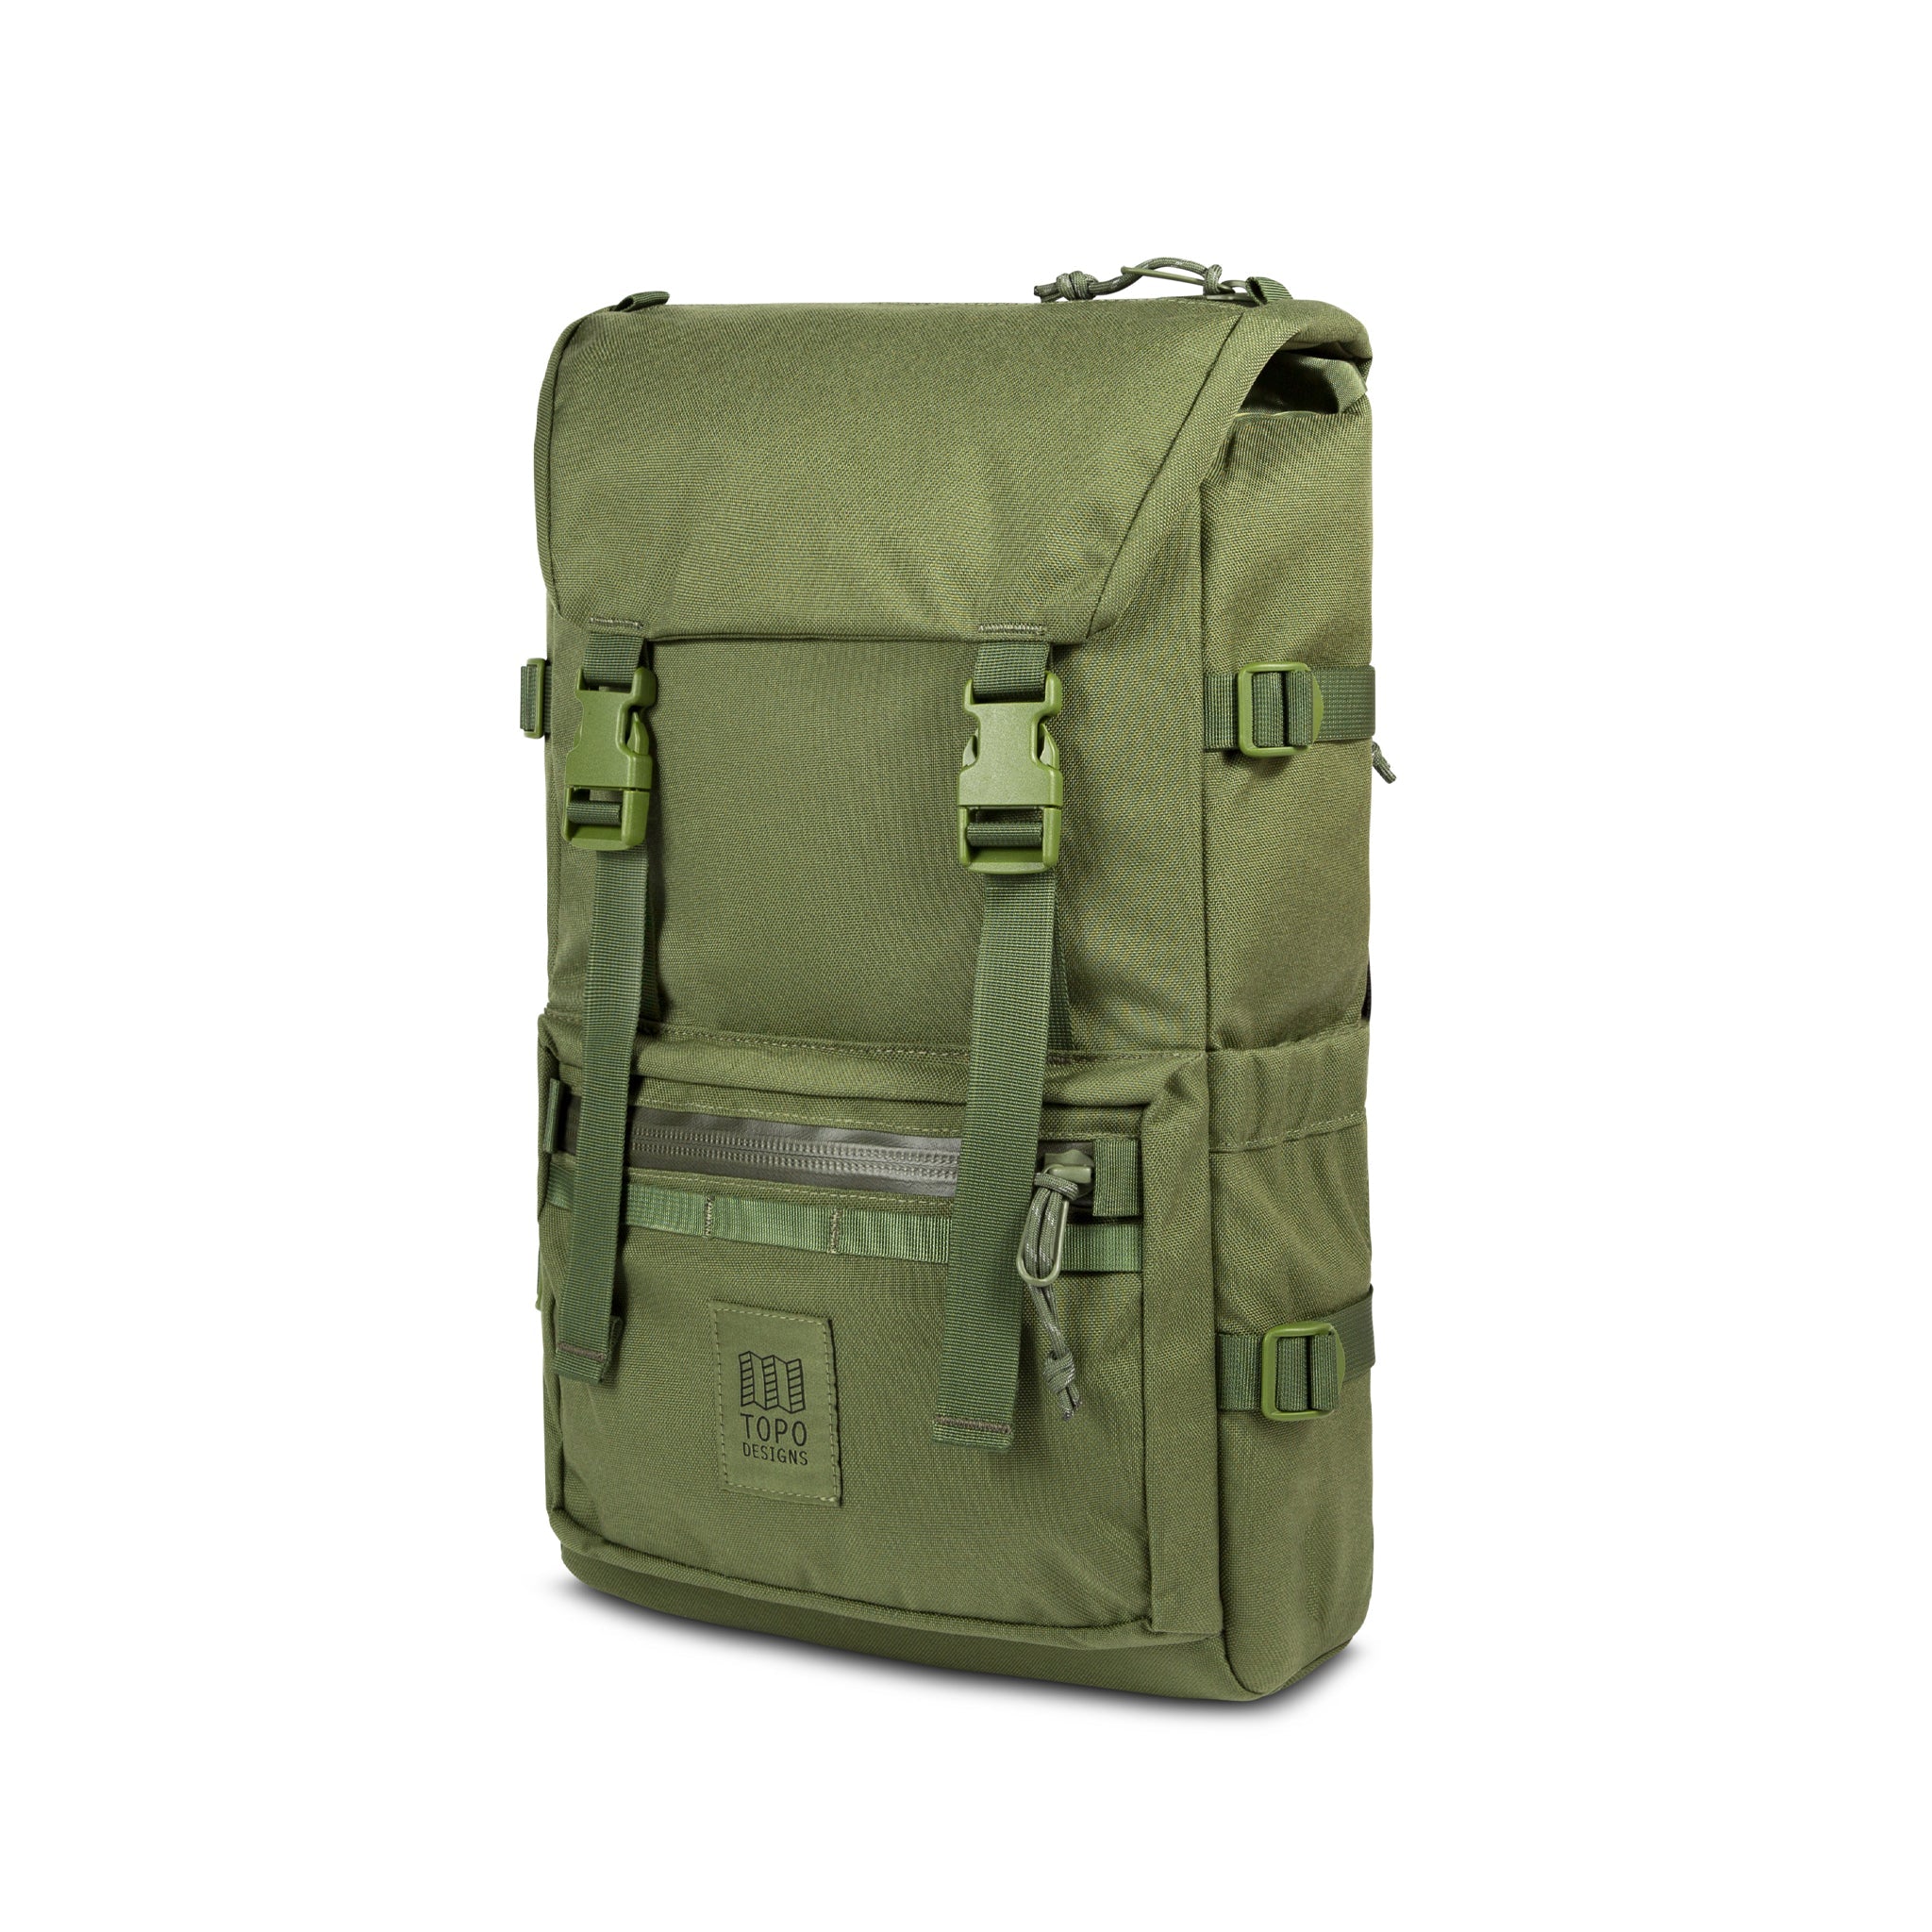 Topo Designs Rover Pack Tech | Airline International – Airline Intl